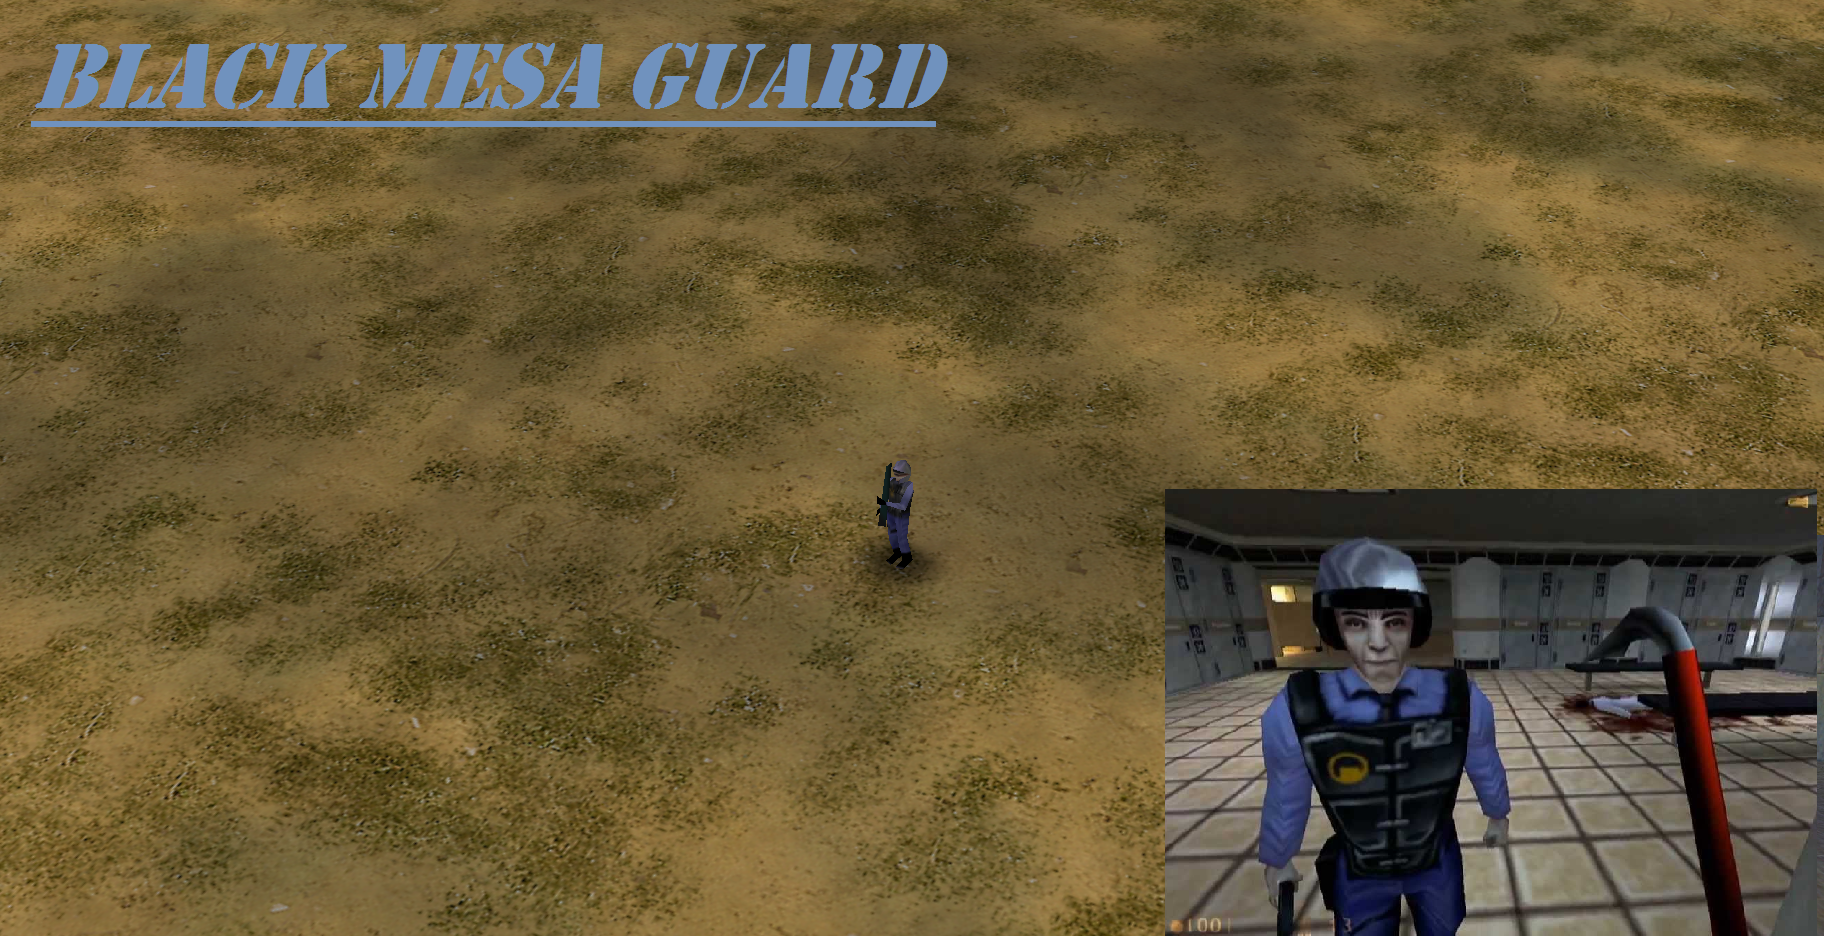 download rss security guard